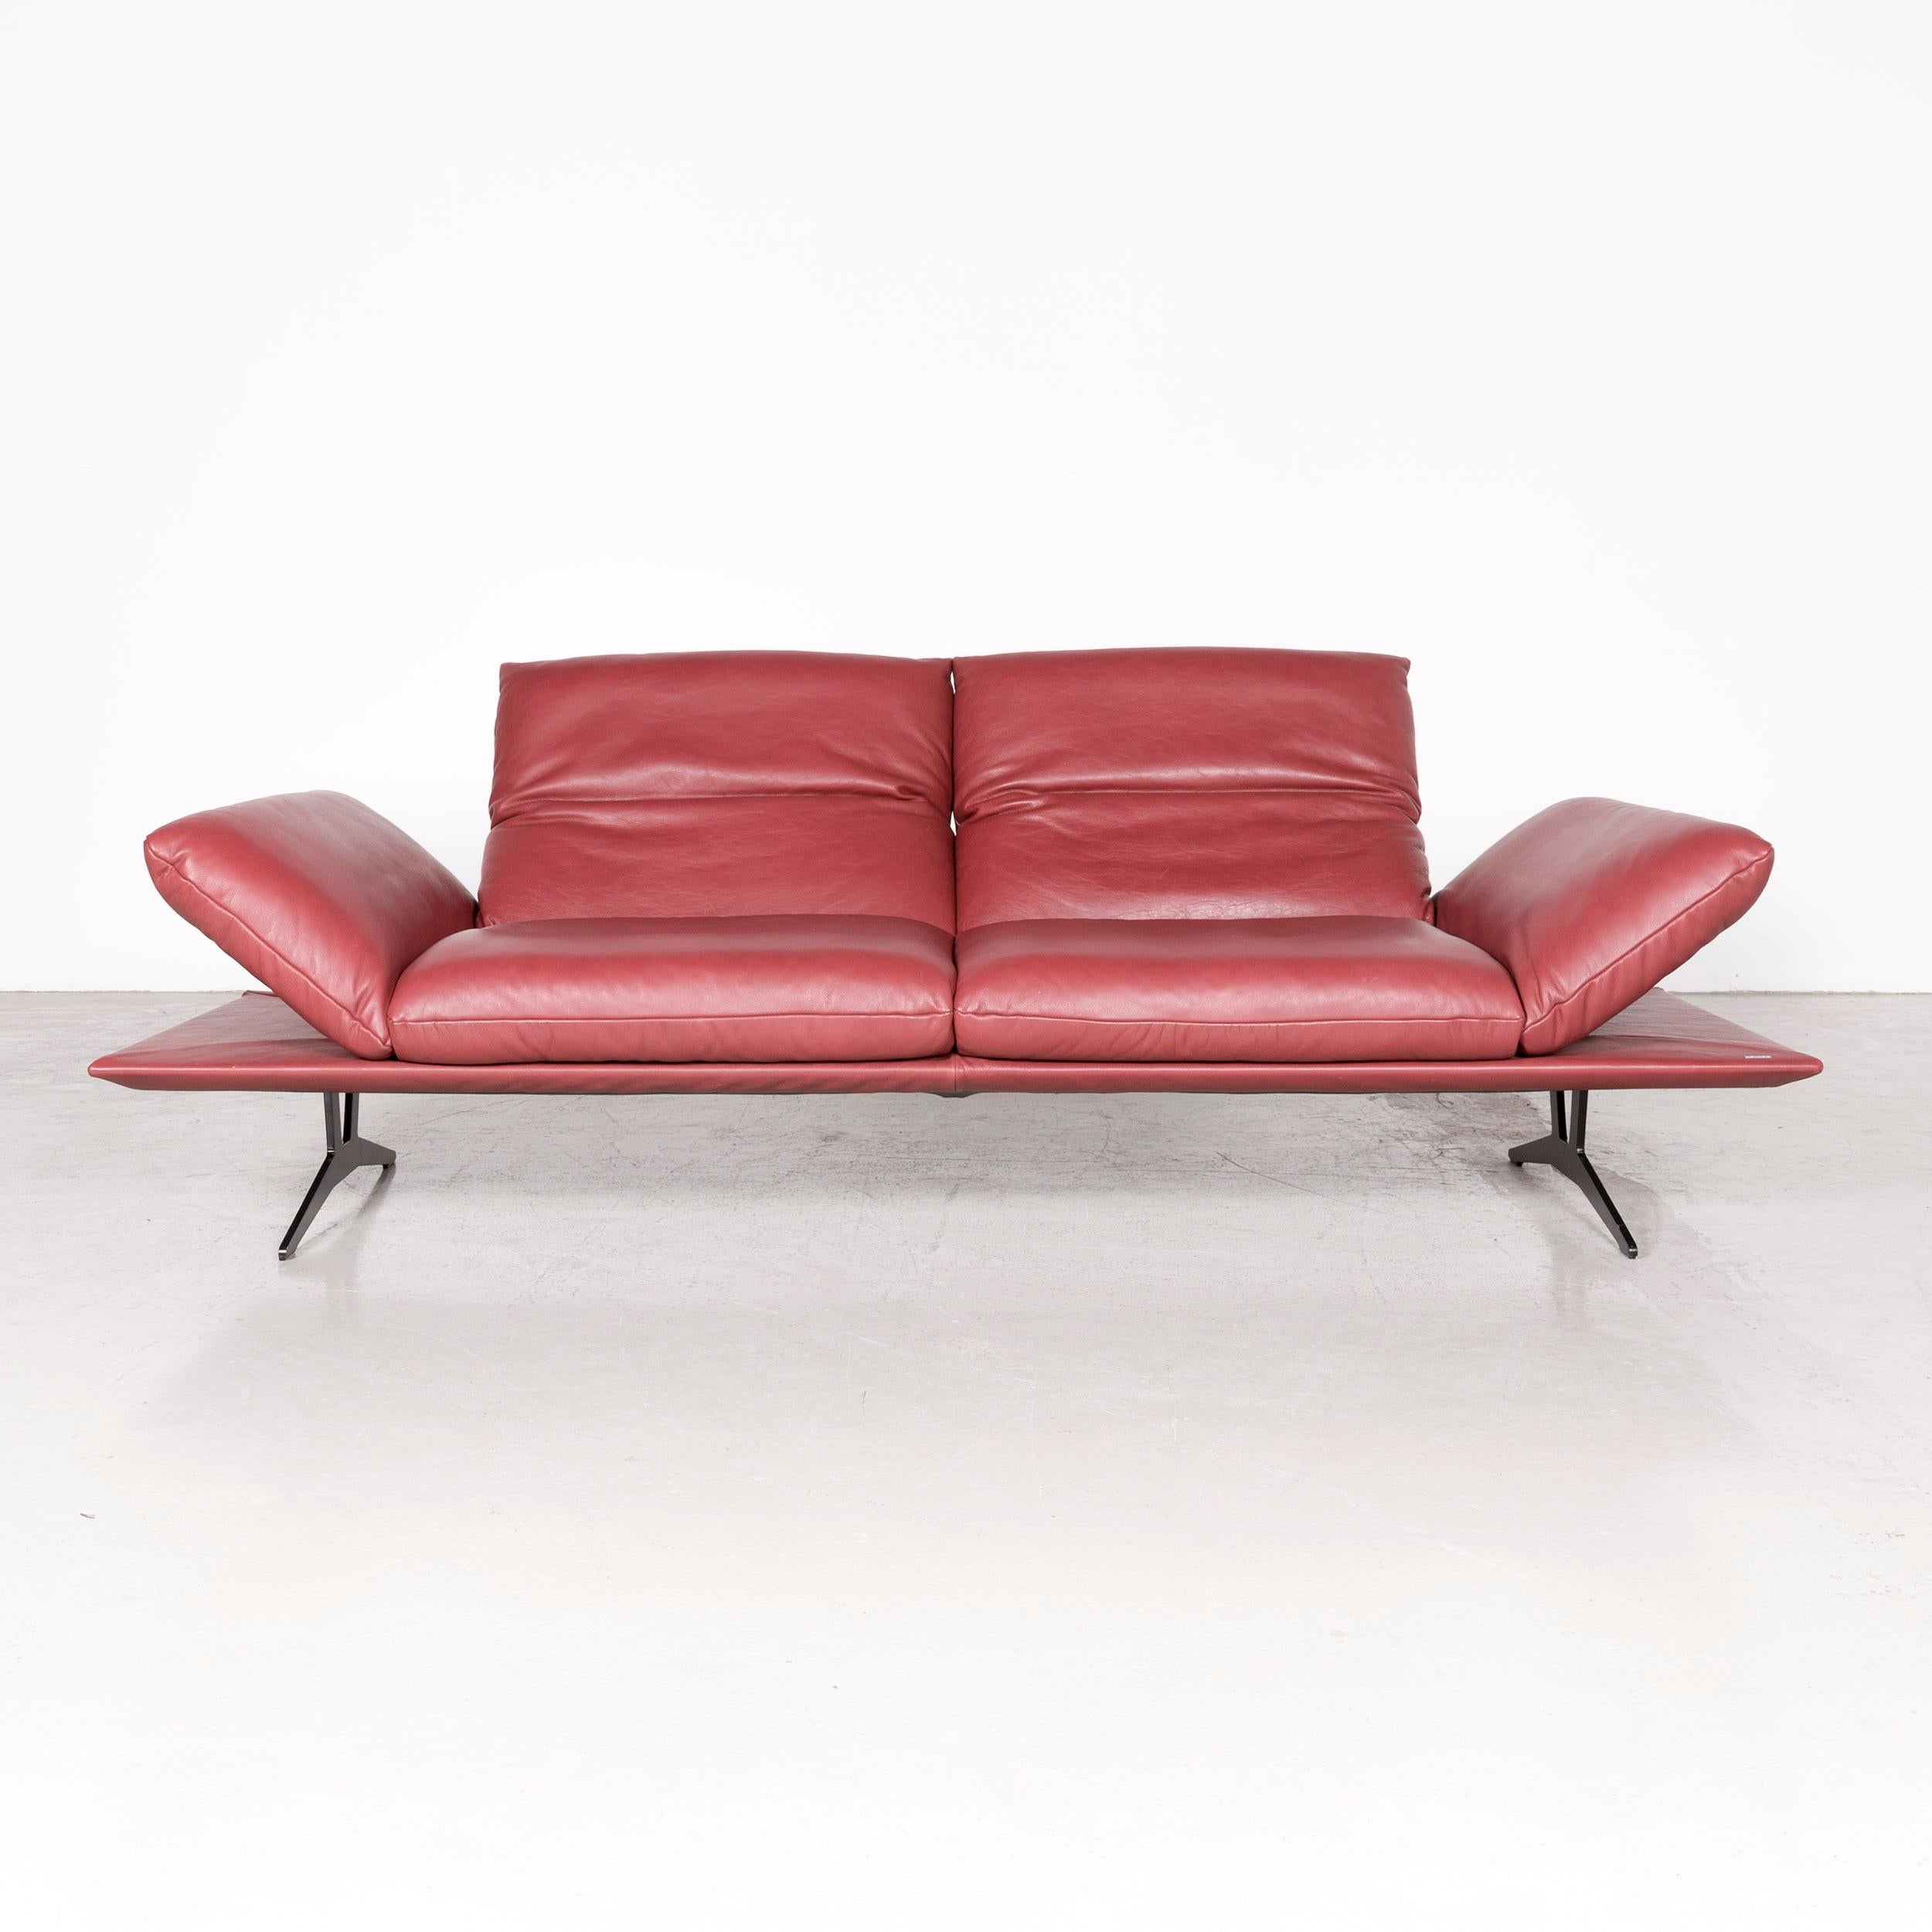 German Koinor Francis Designer Leather Sofa Red Three-Seat Couch